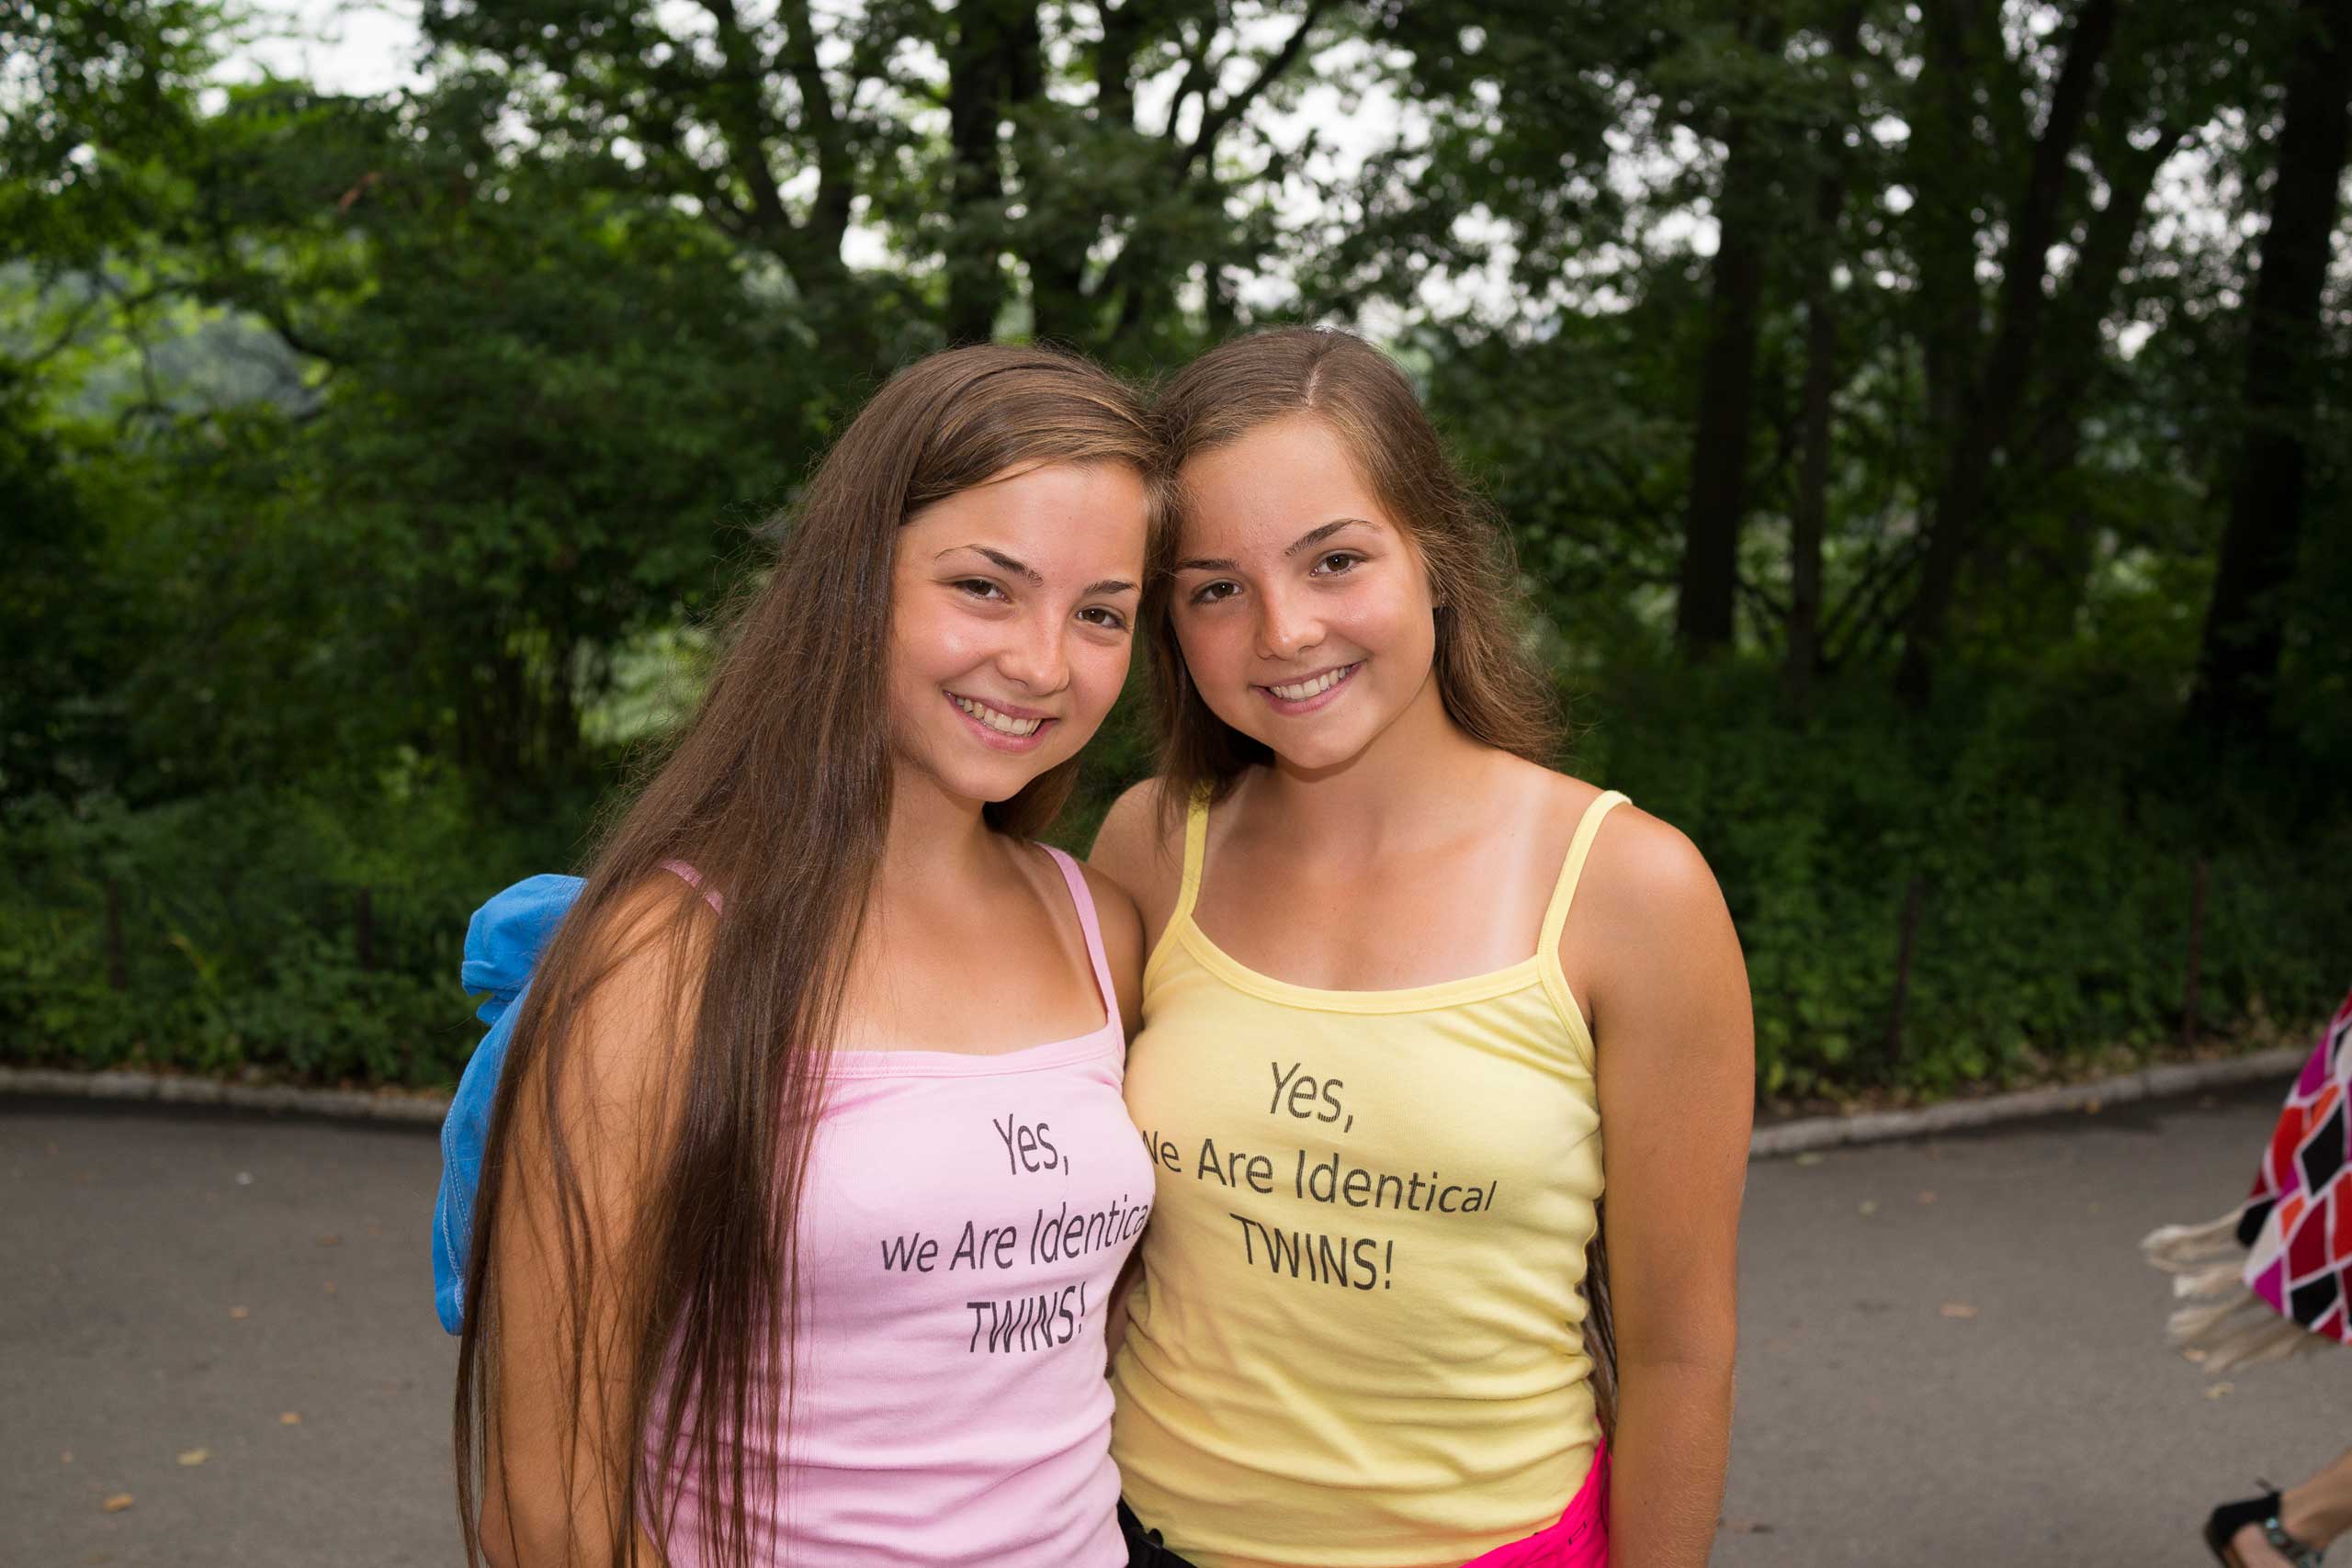 Victoria and Nicole San Filippo pose for a photograph as hundreds of twins ride tandem bikes in an attempt to set the record for the most twins ever riding tandem bikes, in Central Park in New York City on July 15, 2015.